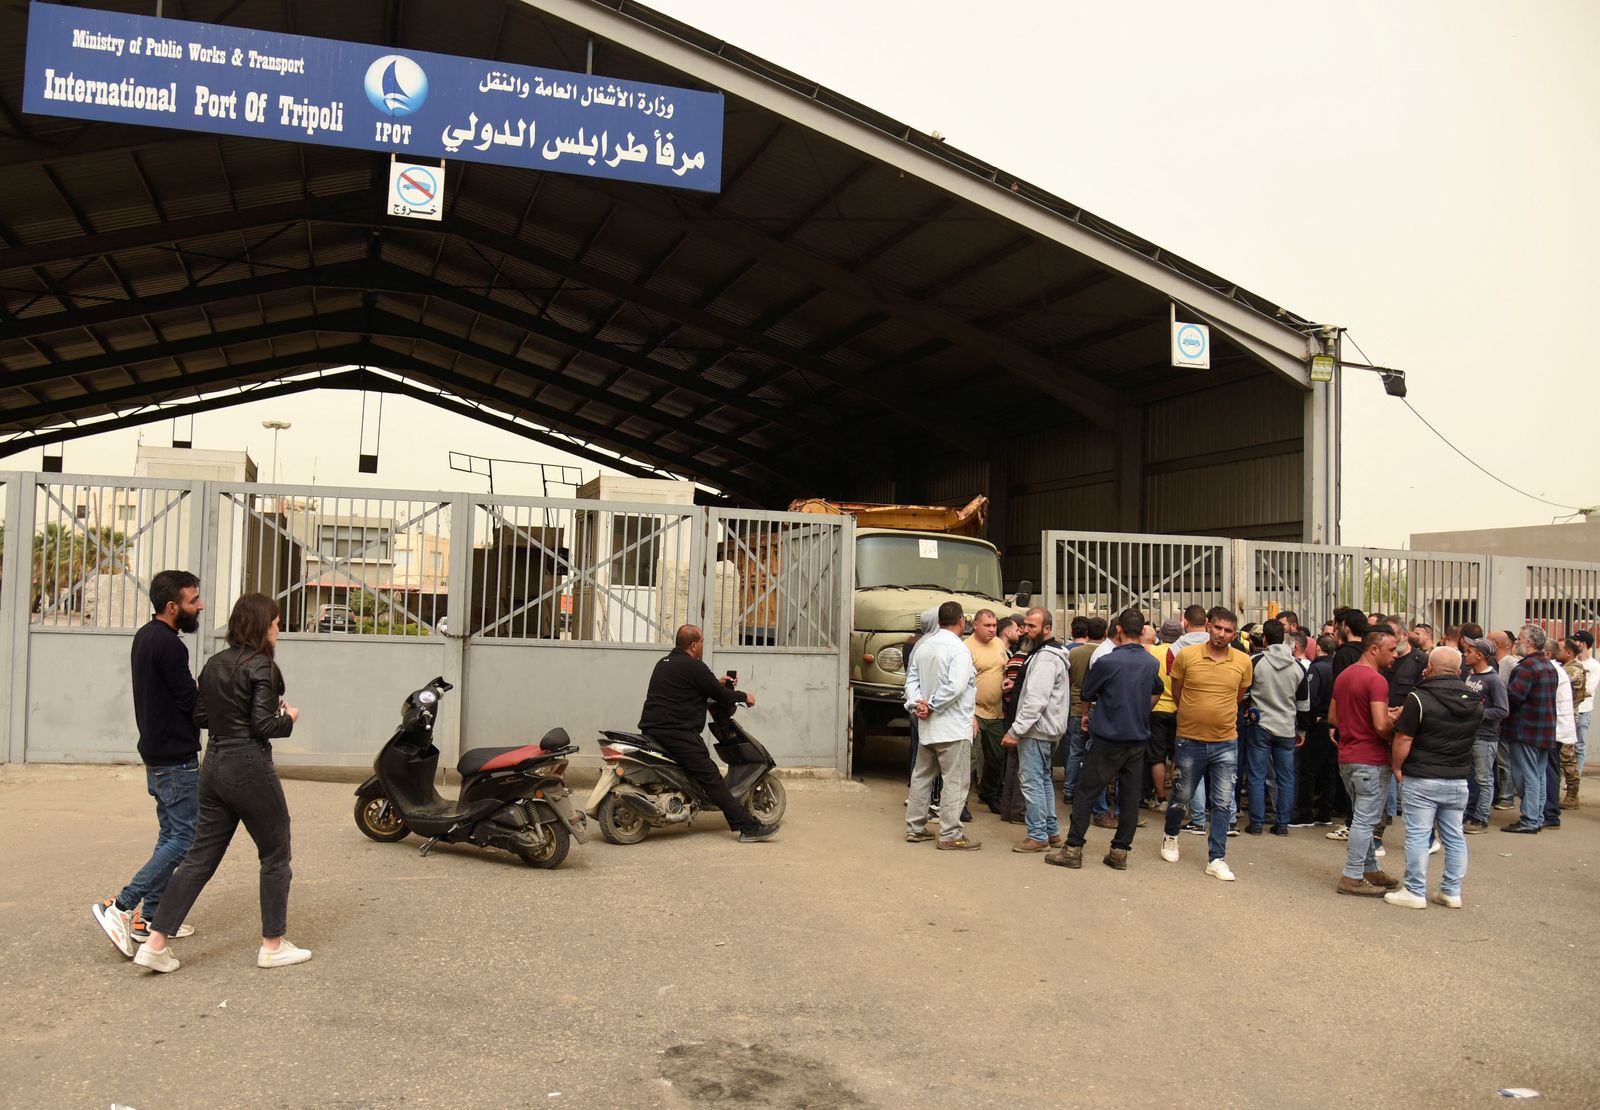 Relatives of people who died when a boat capsized off the Lebanese coast of Tripoli overnight, gather at the entrance of port of Tripoli - REUTERS